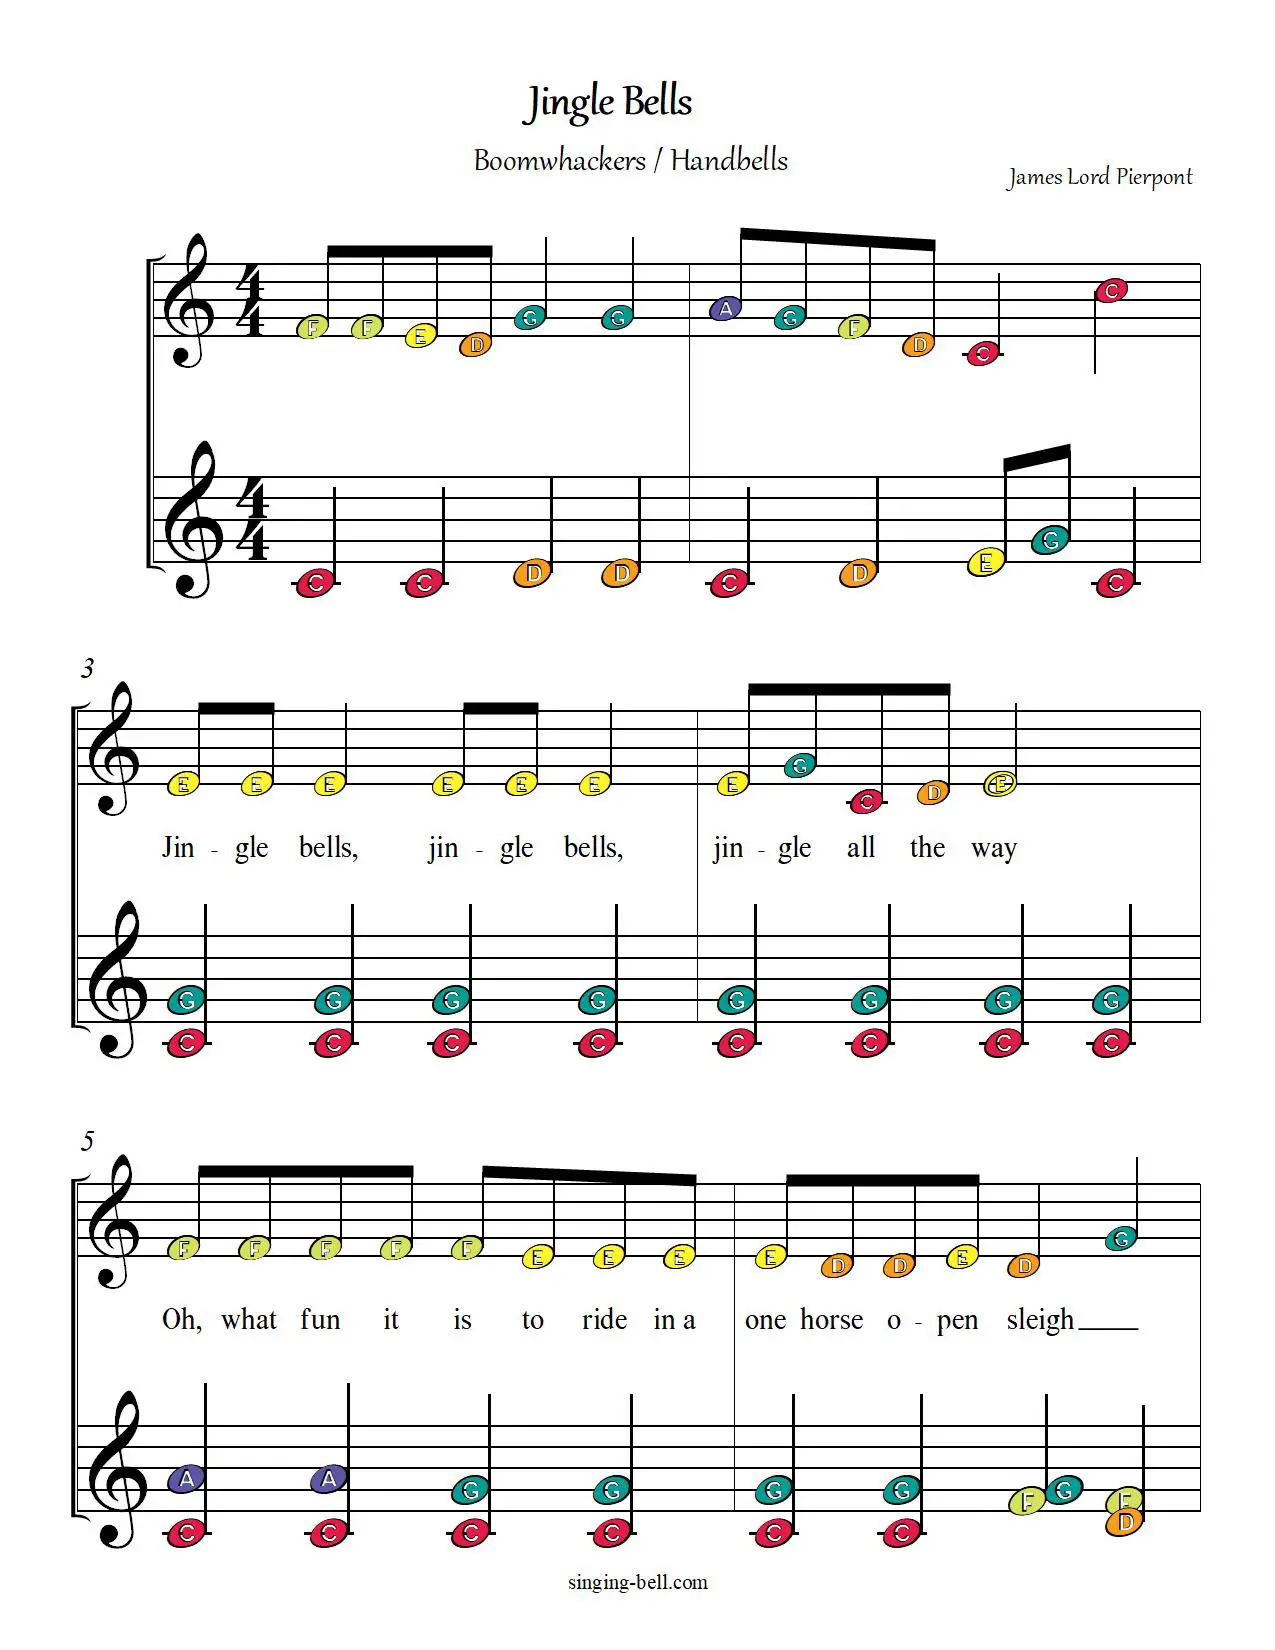 Jingle-Bells arrangement free boomwhackers hadbells sheet music color notes chart pdf page 1